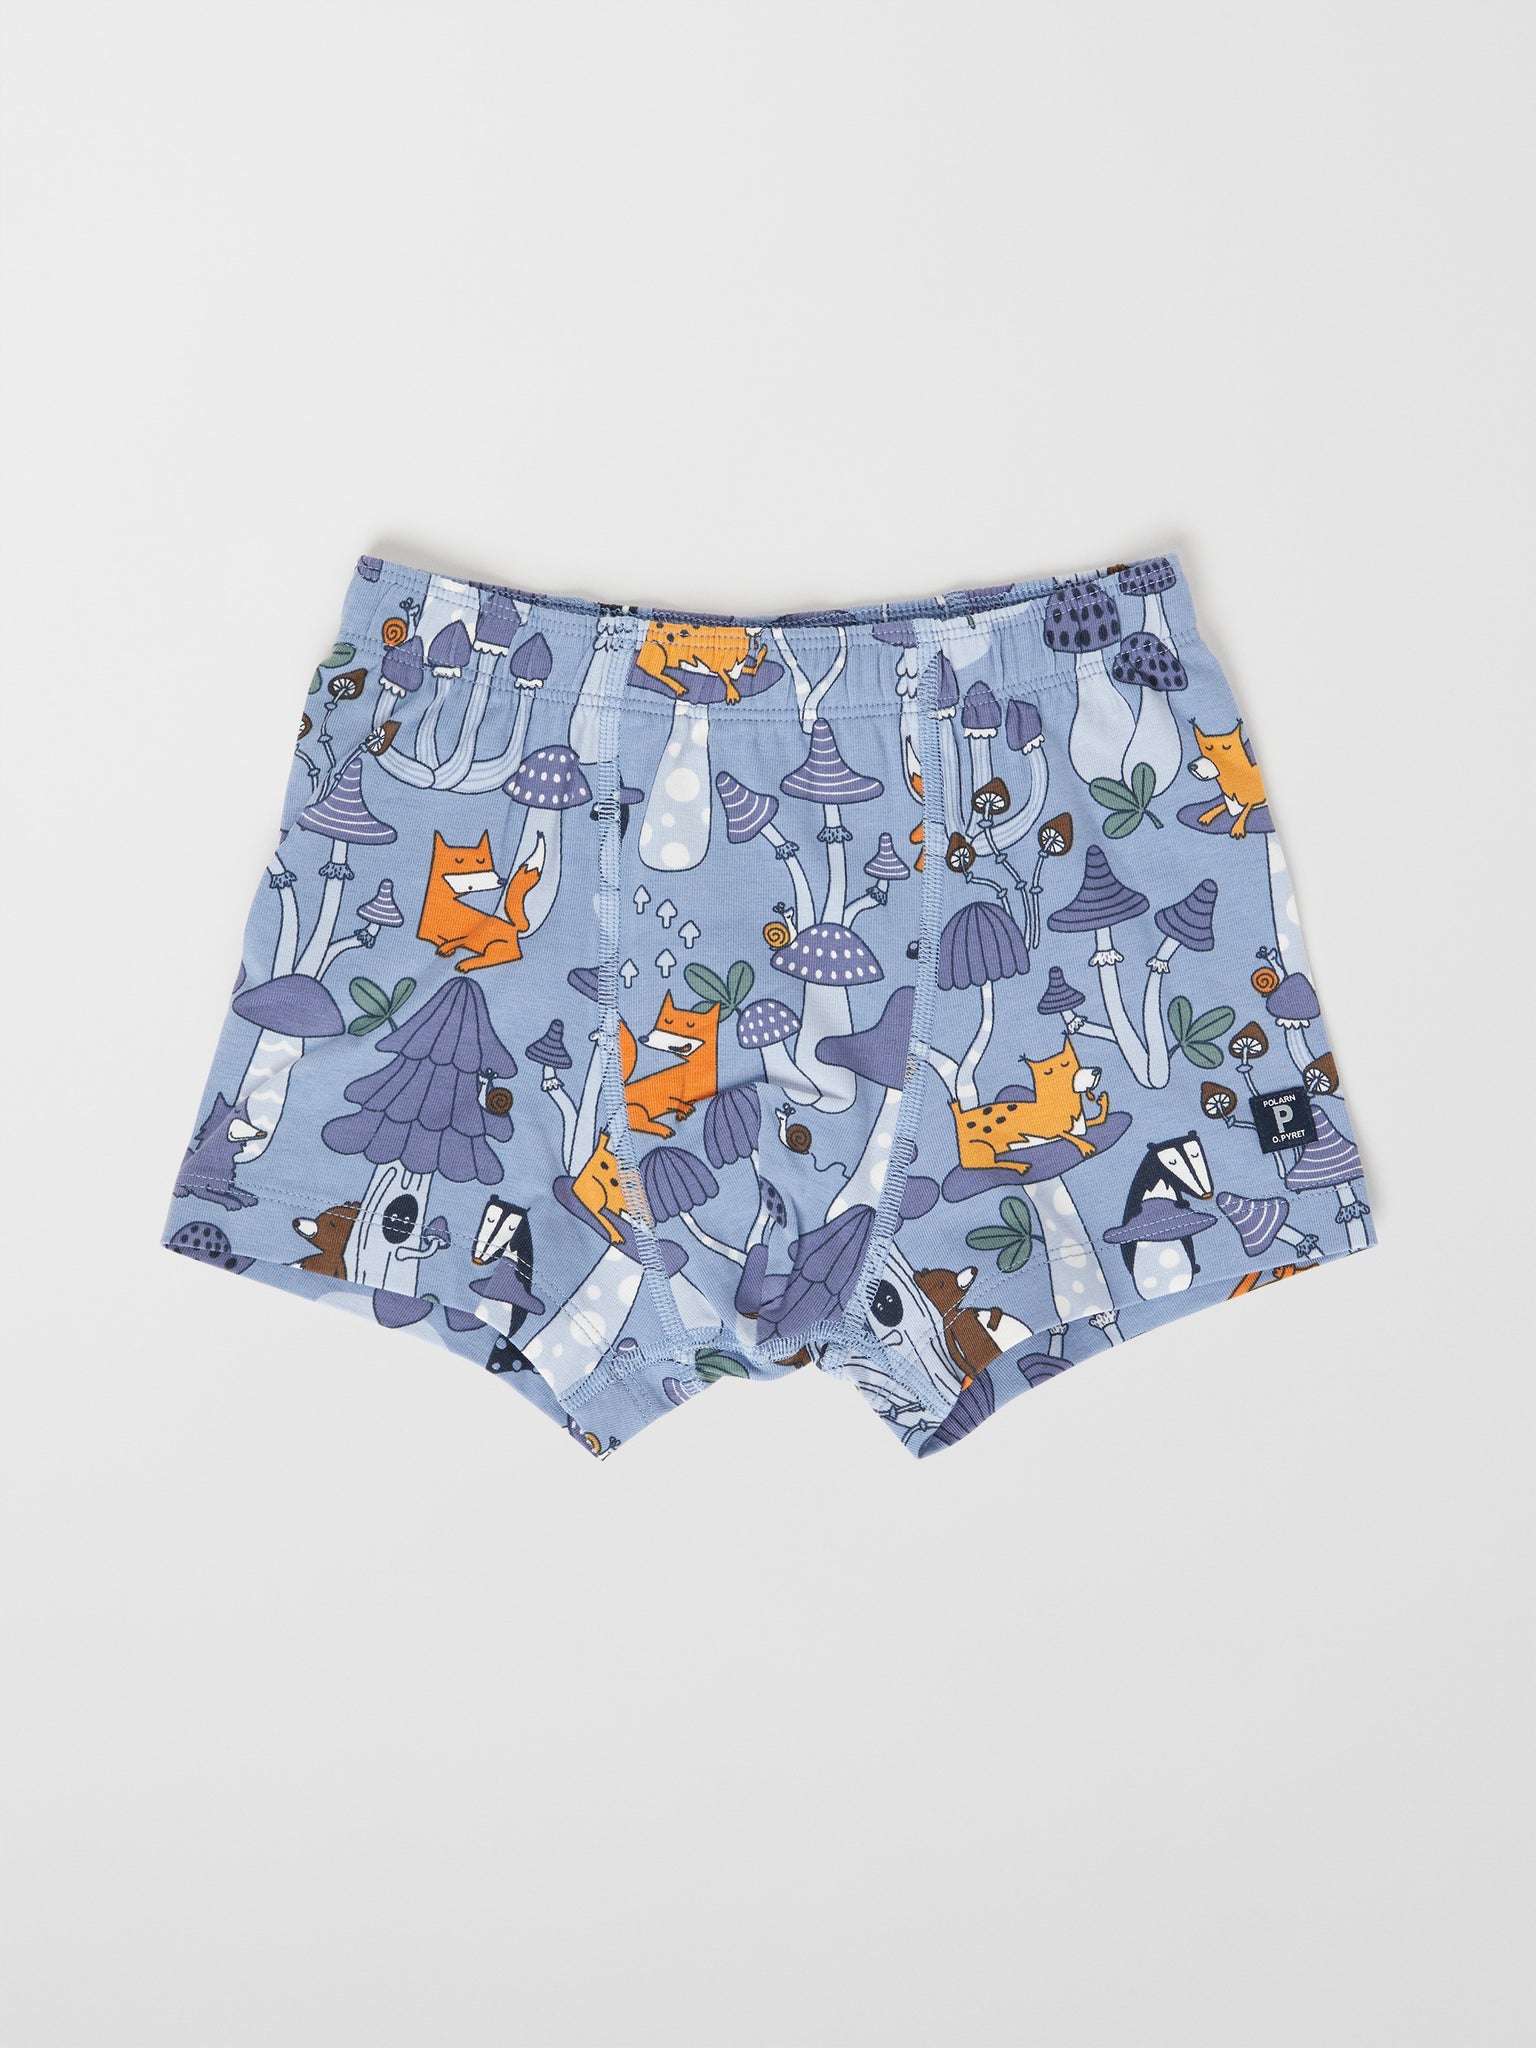 Organic Cotton Boys Blue Boxer Shorts from the Polarn O. Pyret kids collection. Clothes made using sustainably sourced materials.